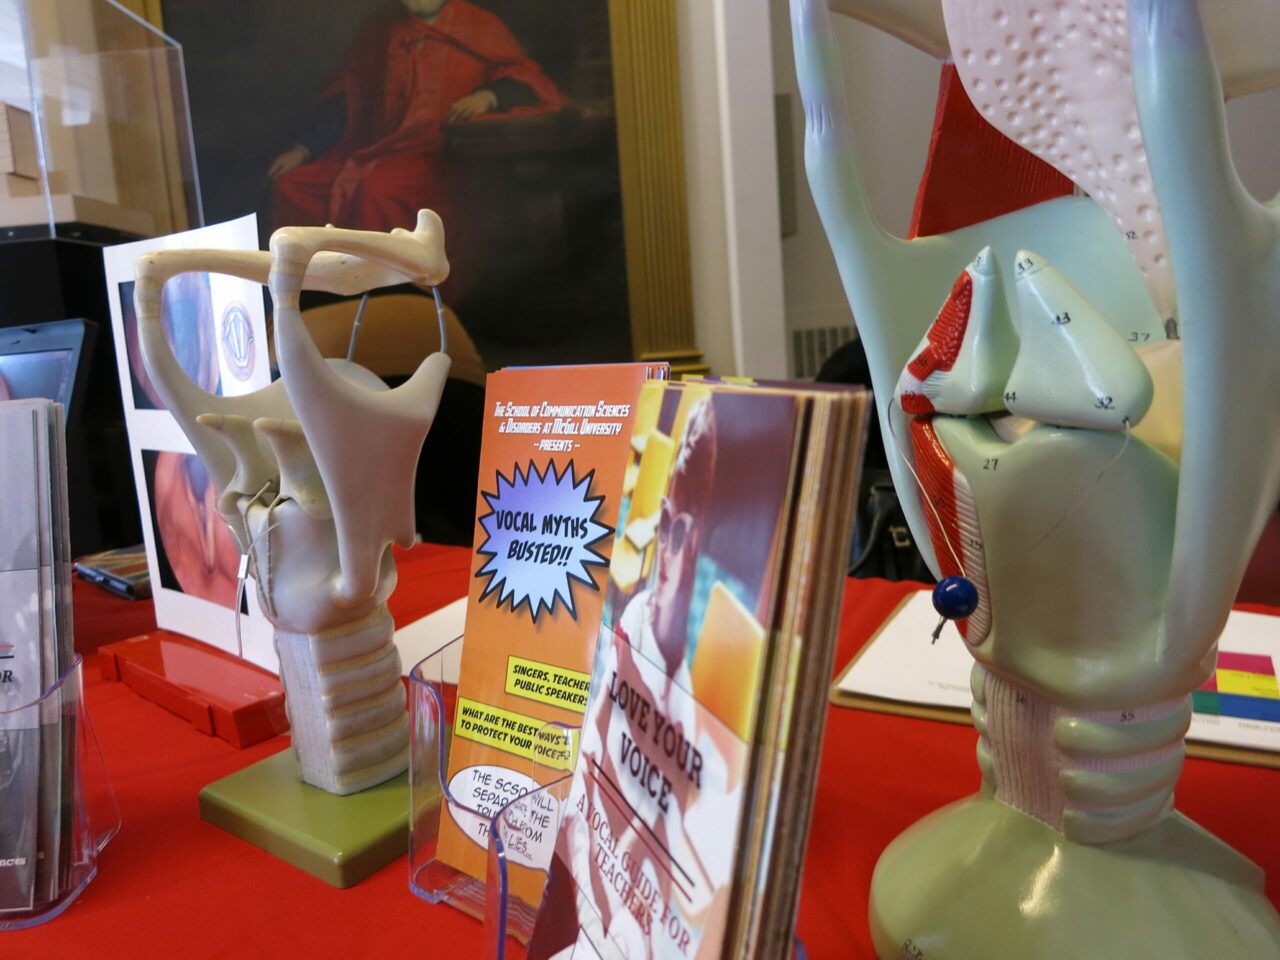 Awareness Booth displaying models of the larynx and pamphlets for distribution. (Photo: Céliane Trudel)